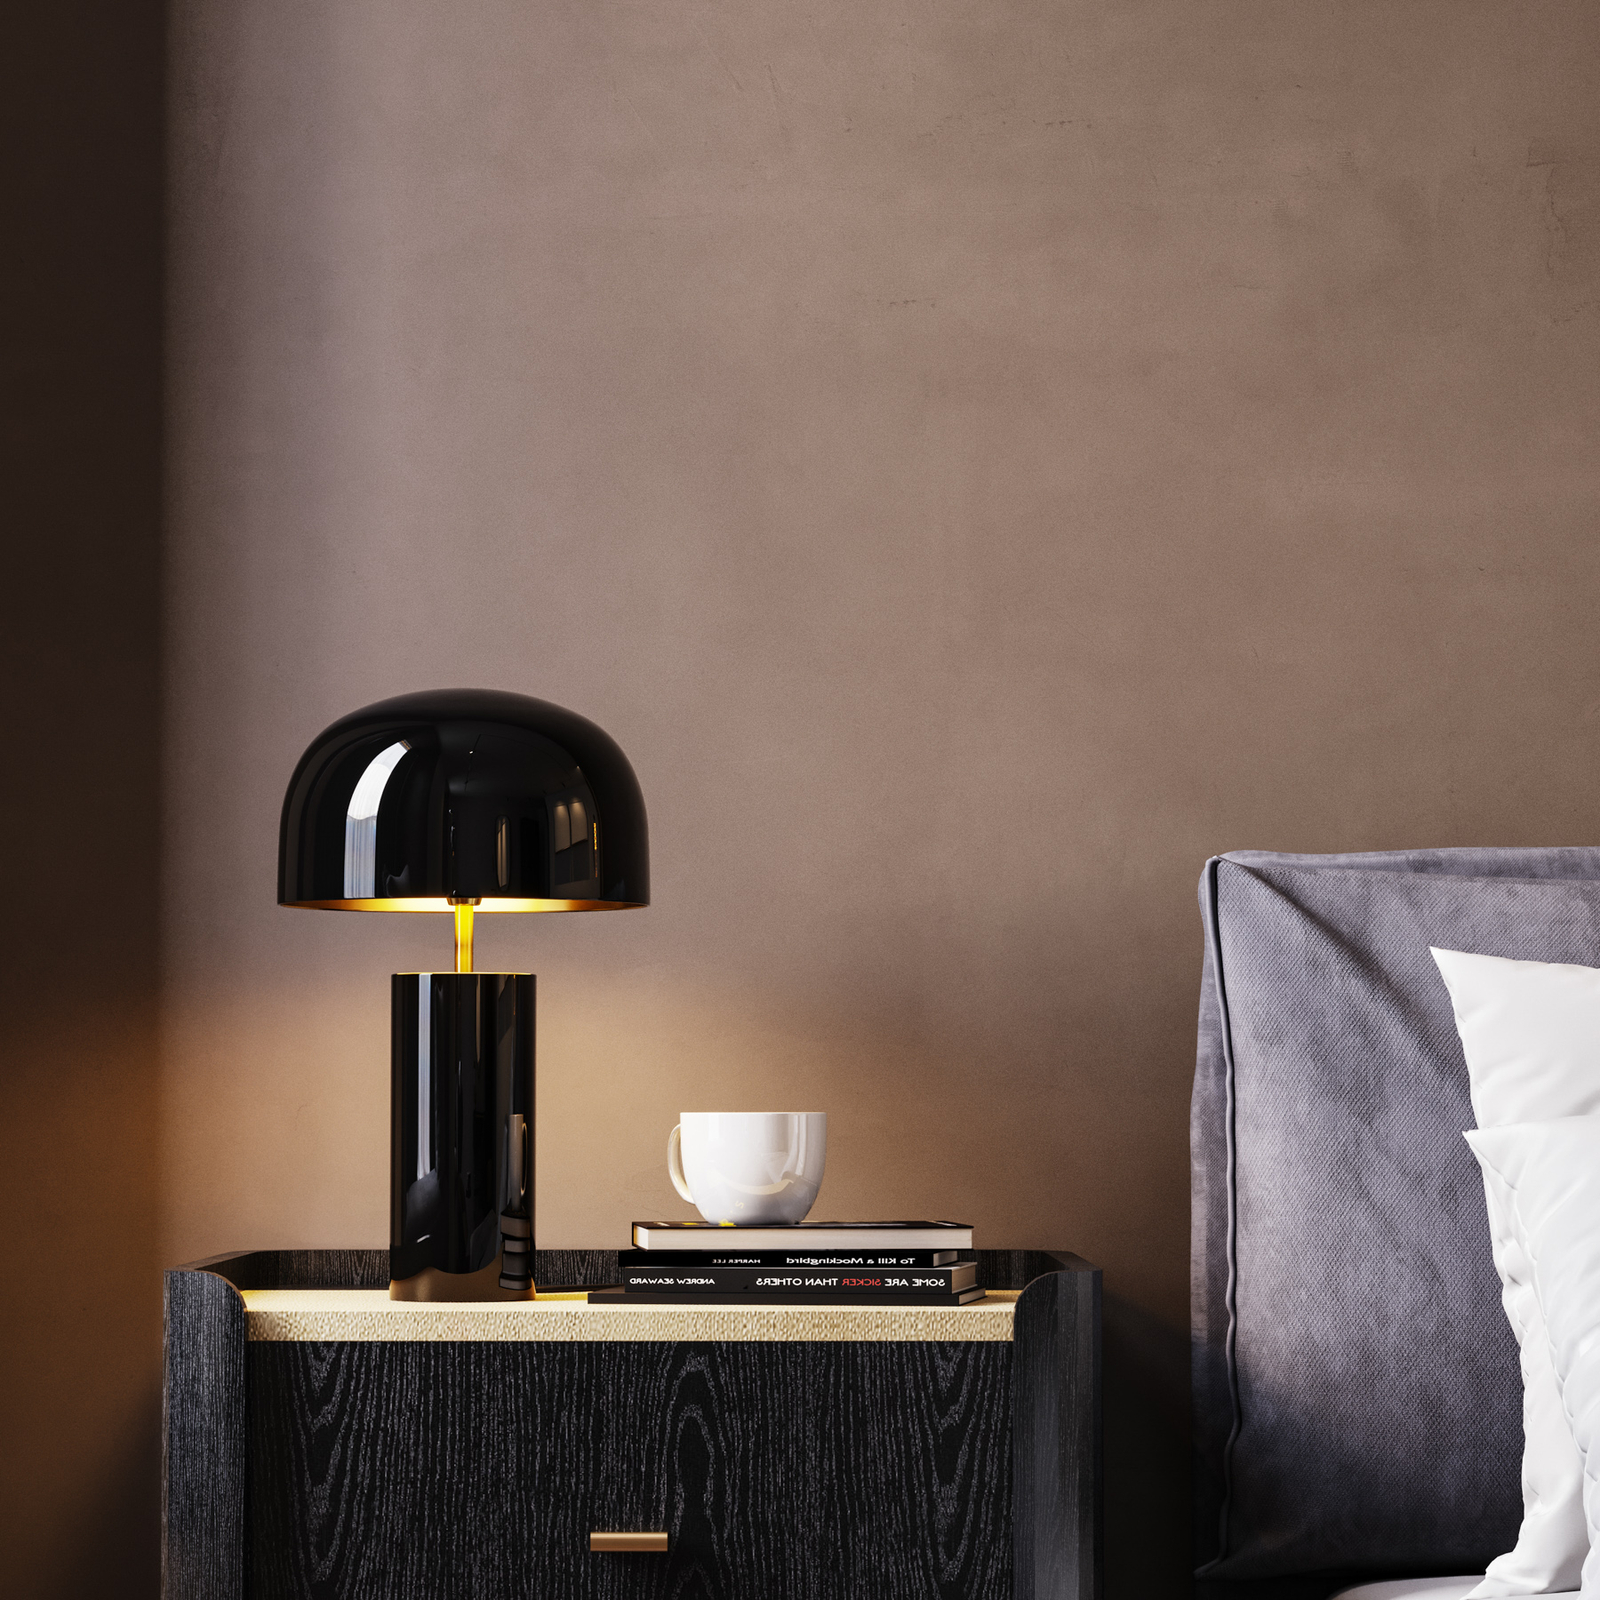 KARE Loungy table lamp, black